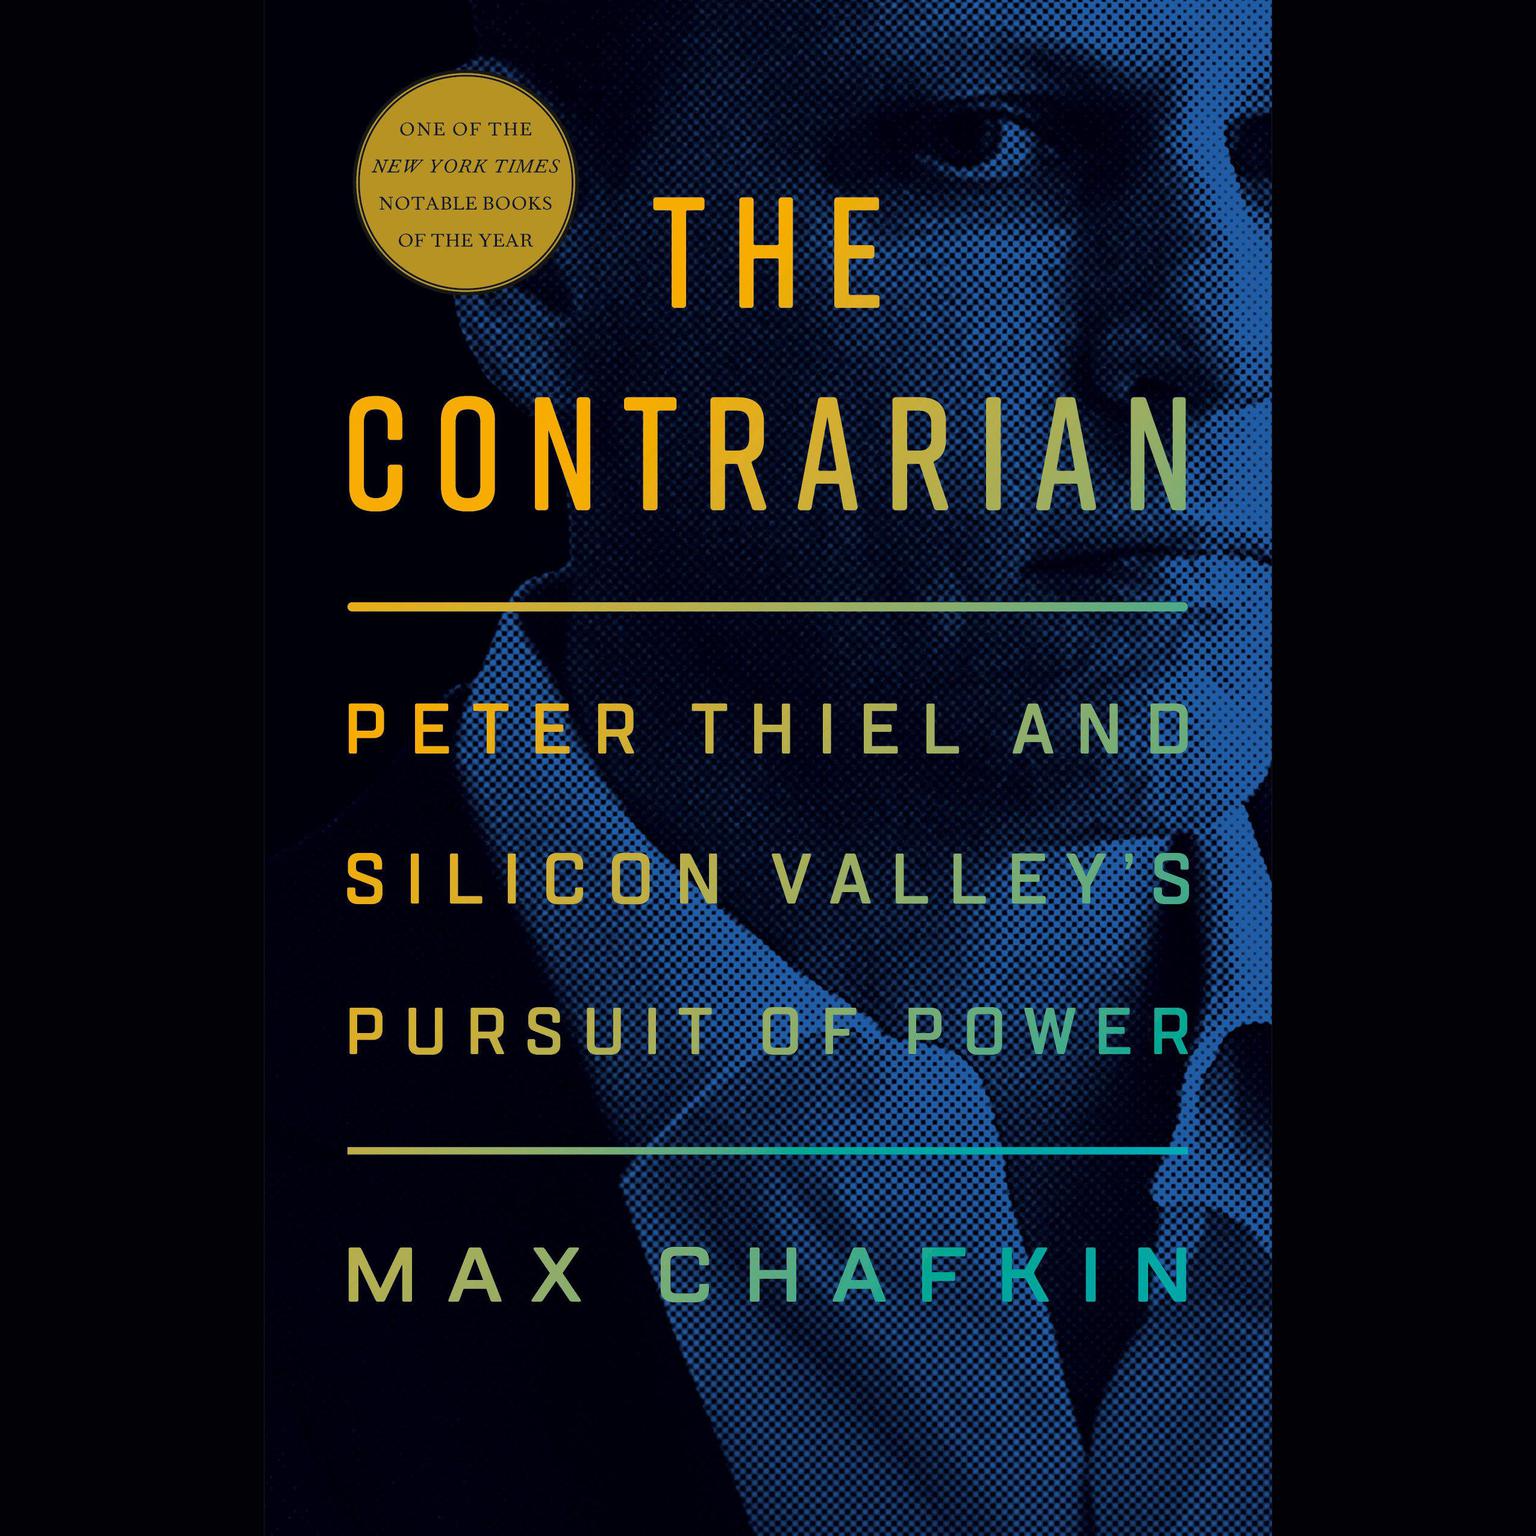 The Contrarian: Peter Thiel and Silicon Valleys Pursuit of Power Audiobook, by Max Chafkin